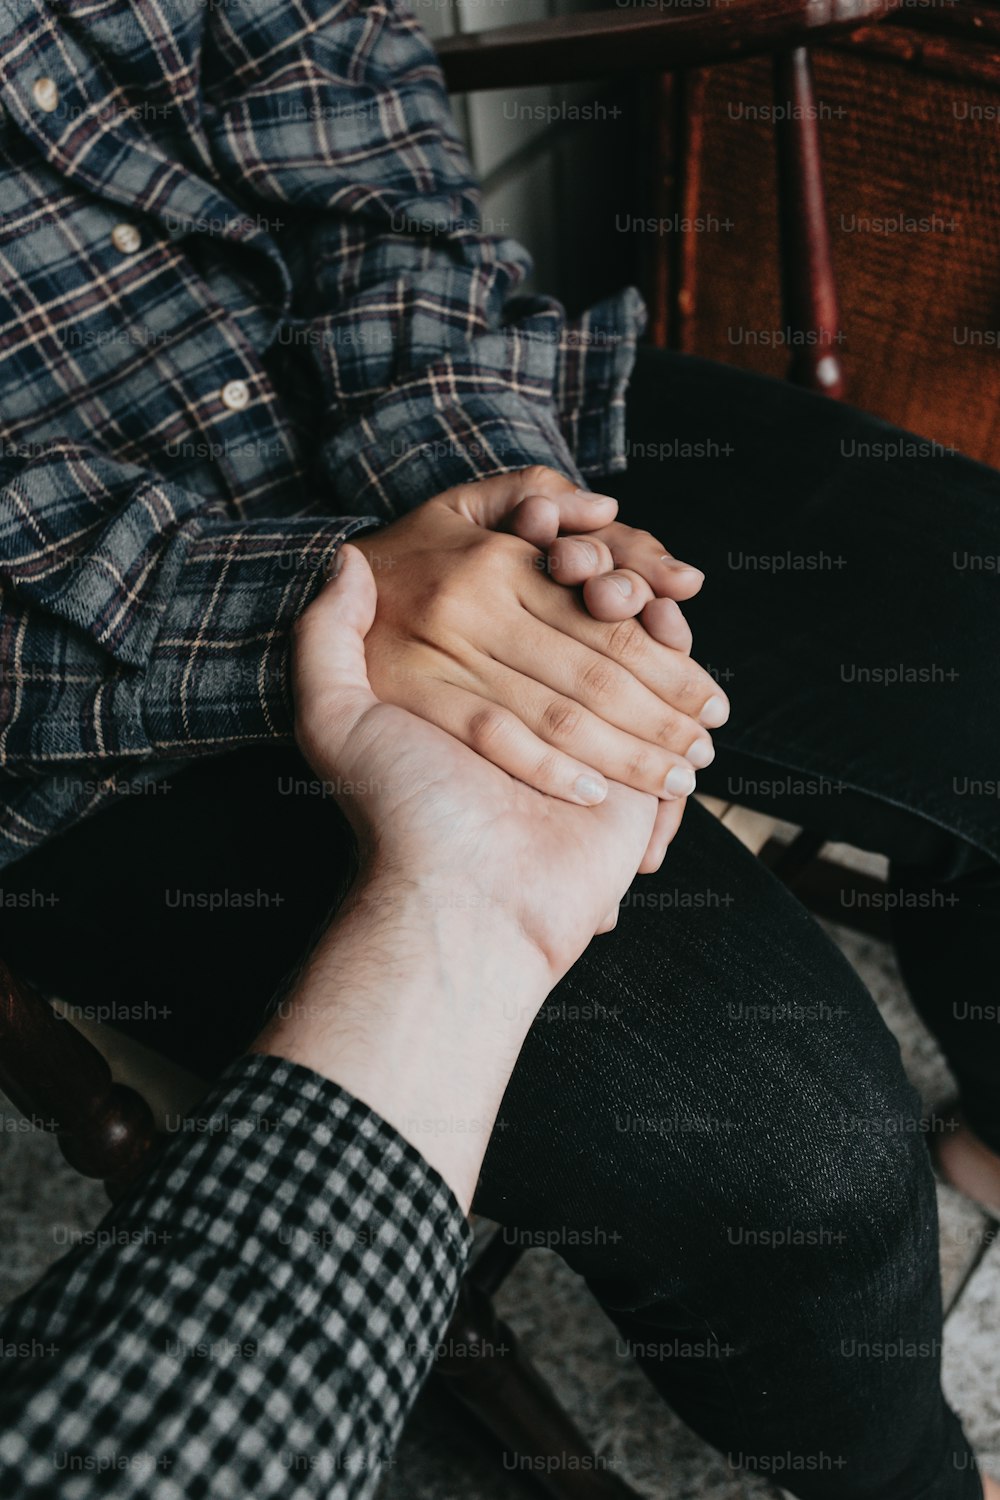 two people holding hands while sitting on a chair